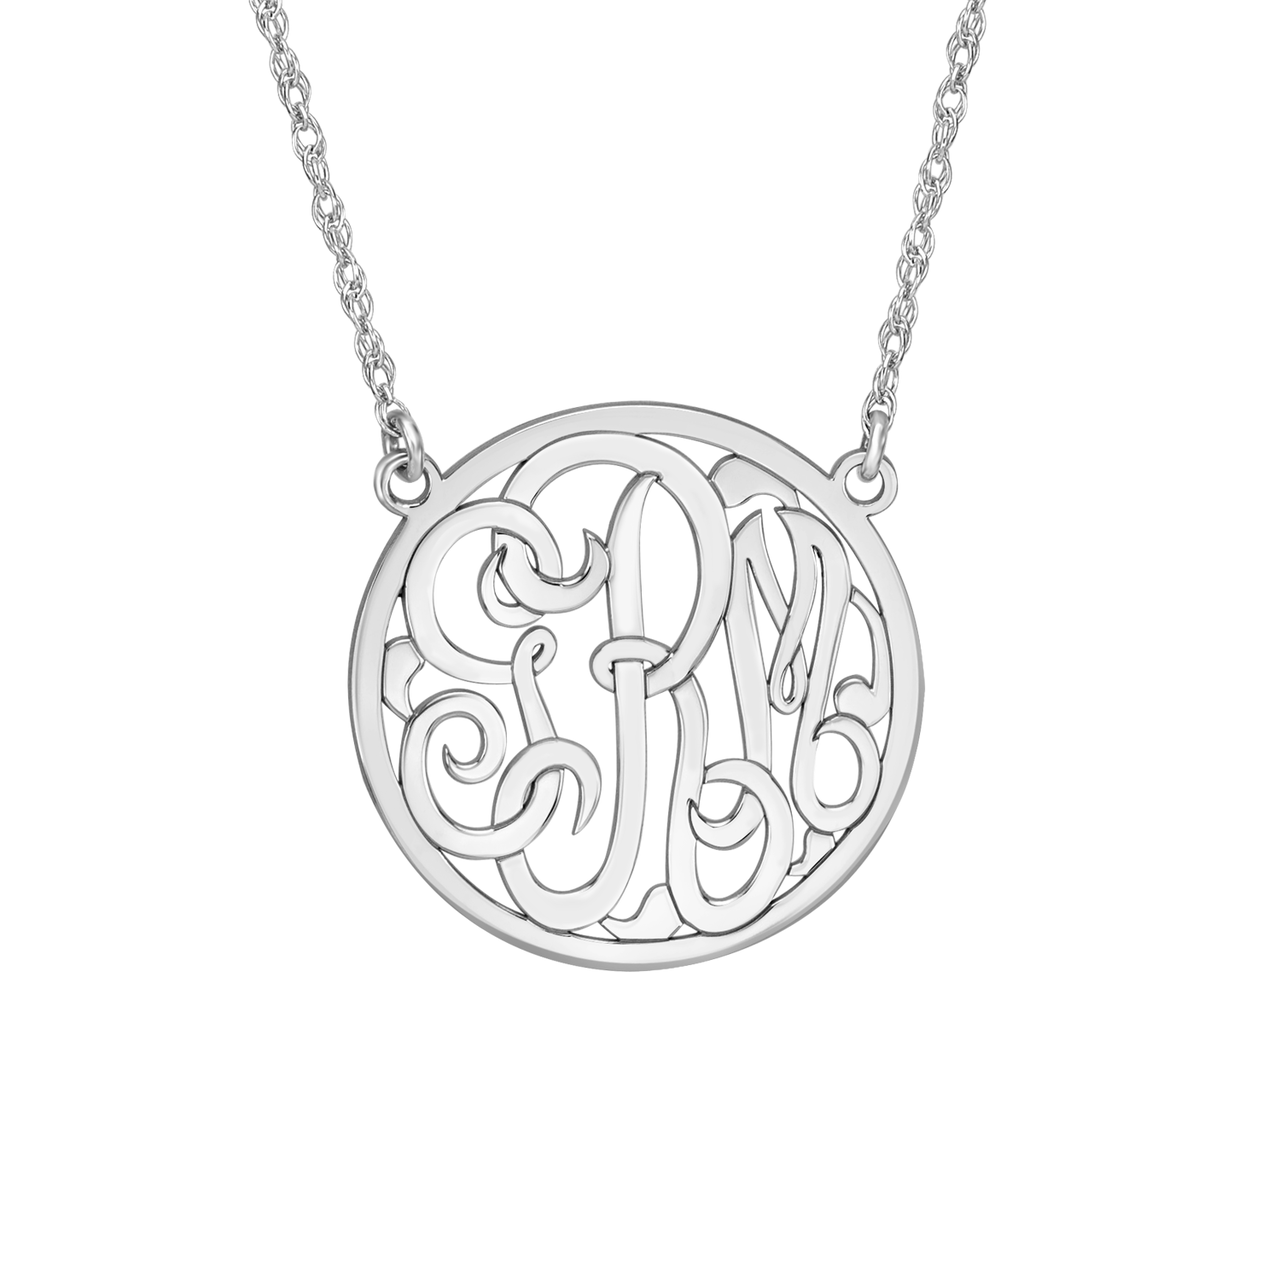 Fink's 15mm Classic Bordered Monogram Necklace